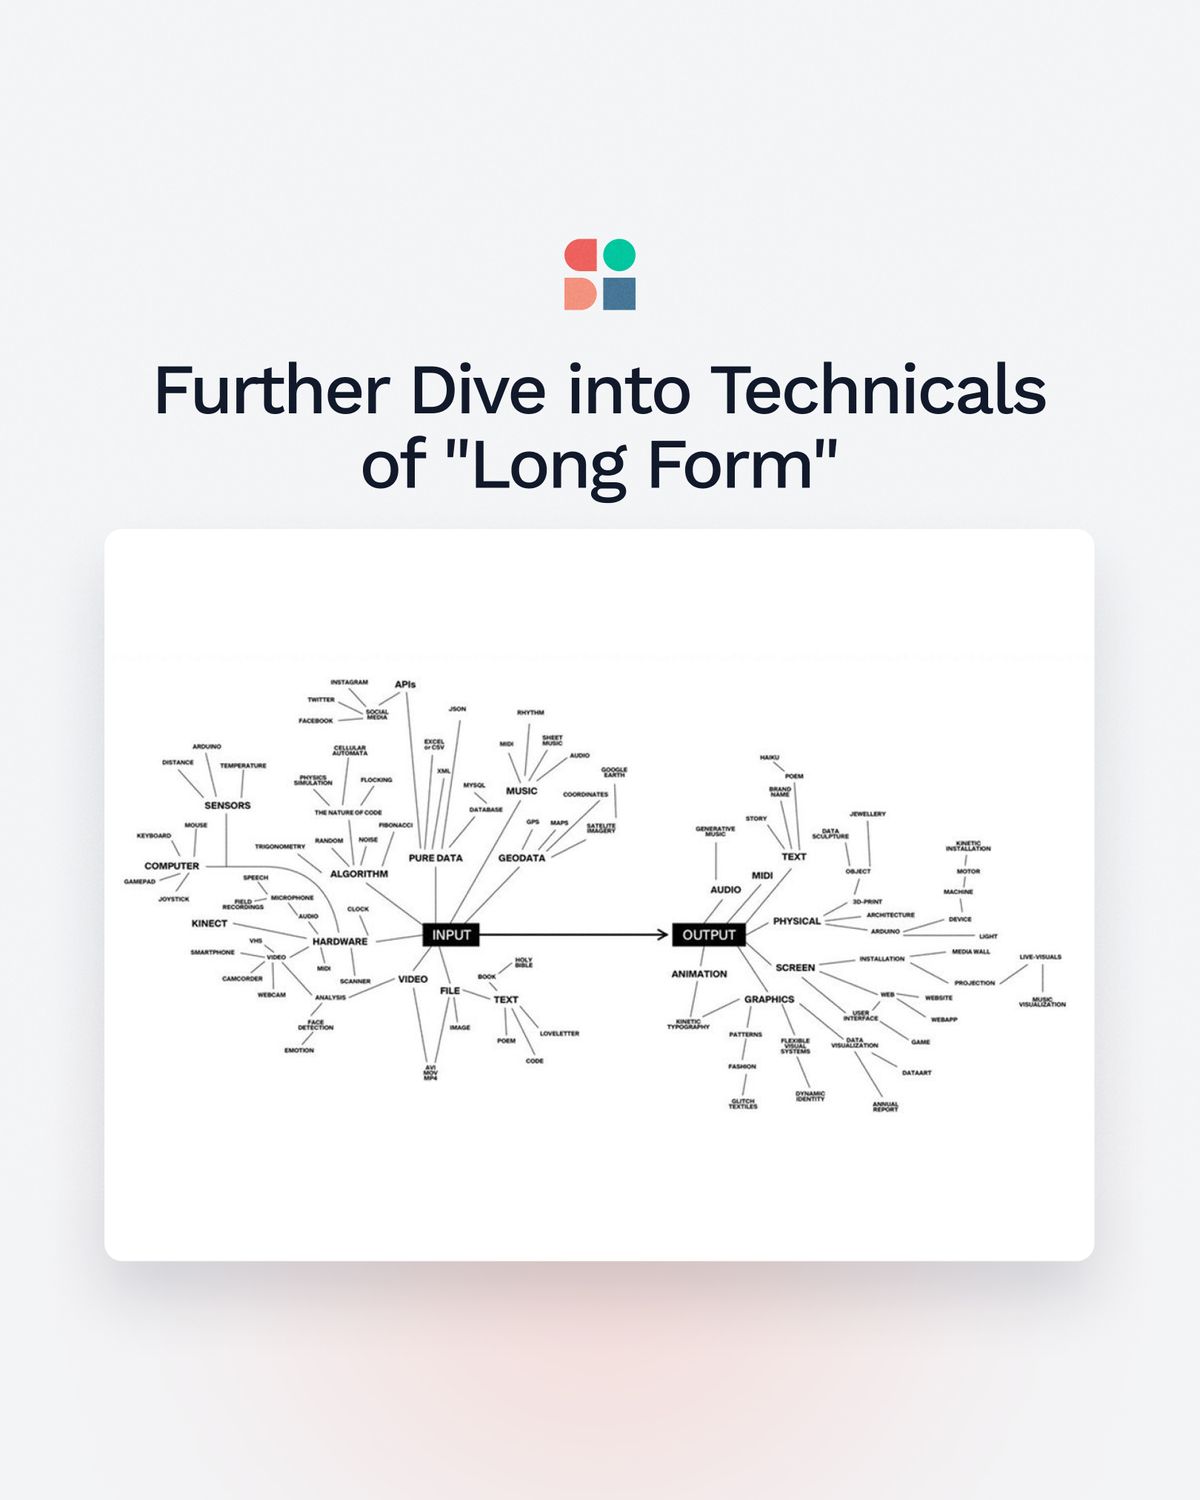 Further Dive into Technicals of "Long Form"